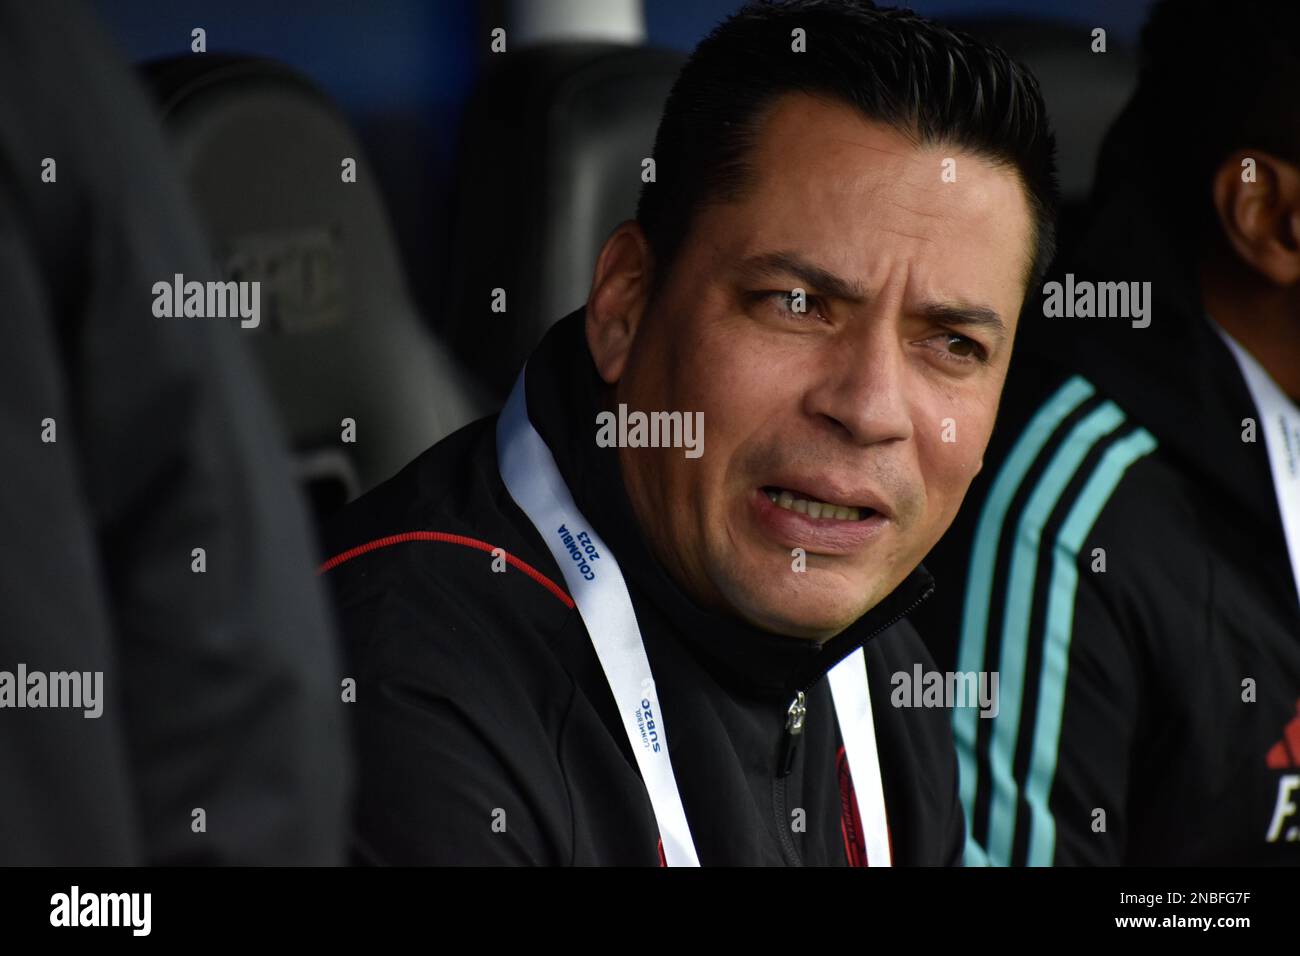 Bogota, Colombia on February 12, 2023. Colombia's team manager Hector Cardenas during the South American U-20 Conmebol Tournament match between Colombia and Venezuela, in Bogota, Colombia on February 12, 2023. Photo by: Cristian Bayona/Long Visual Press Stock Photo